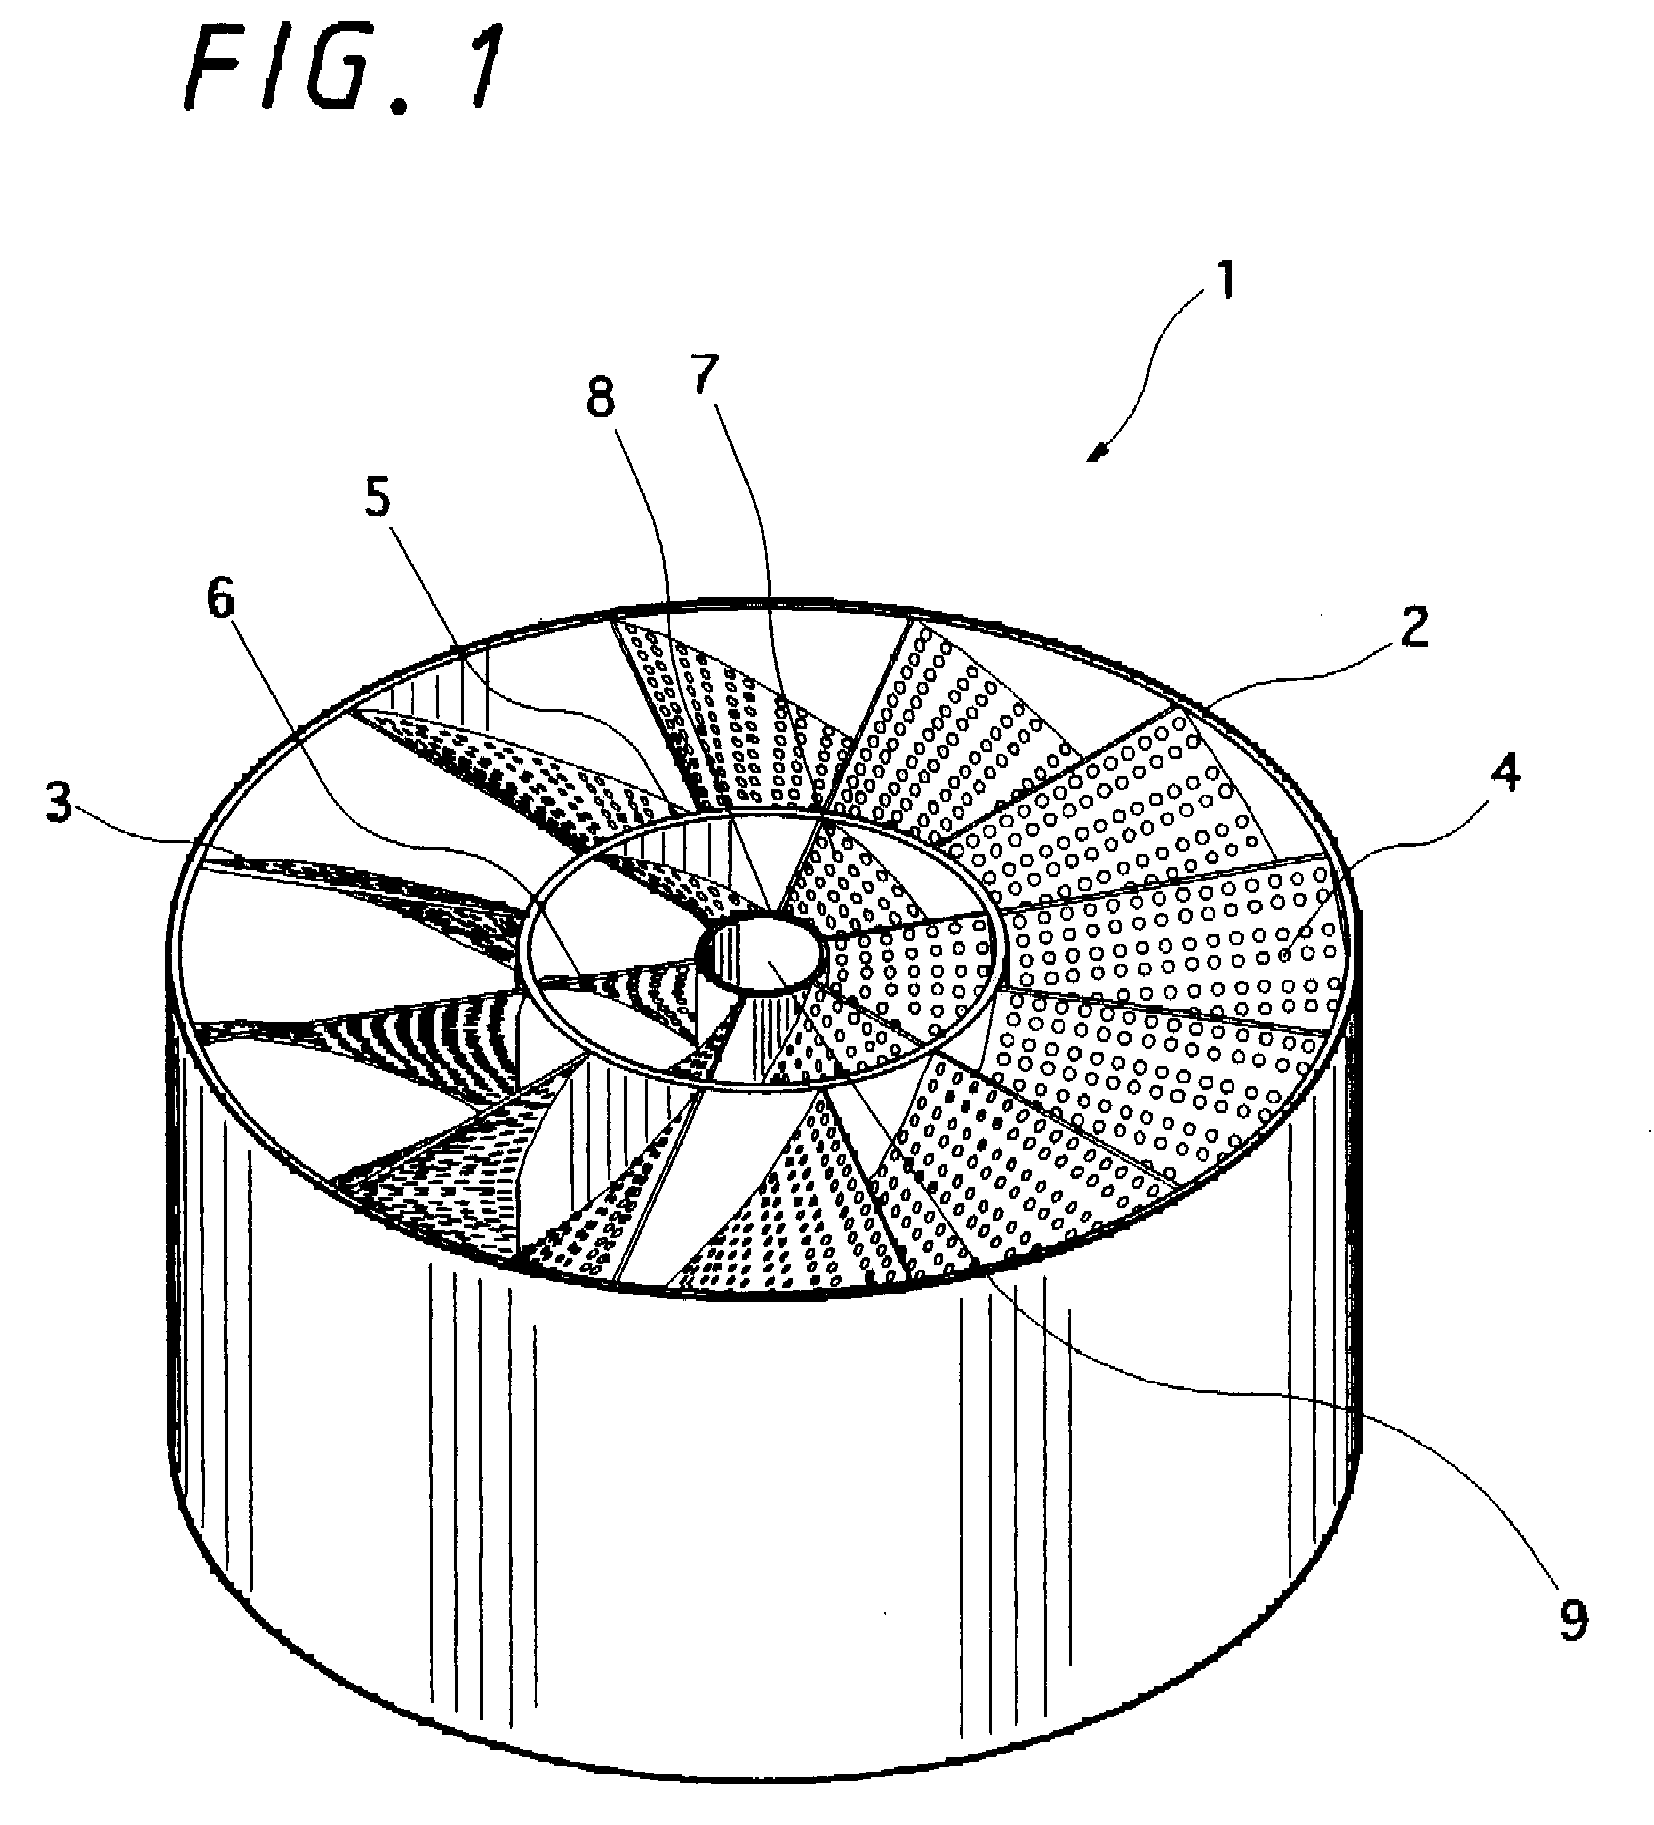 Mixing Element and Static Fluid Mixer Using Same